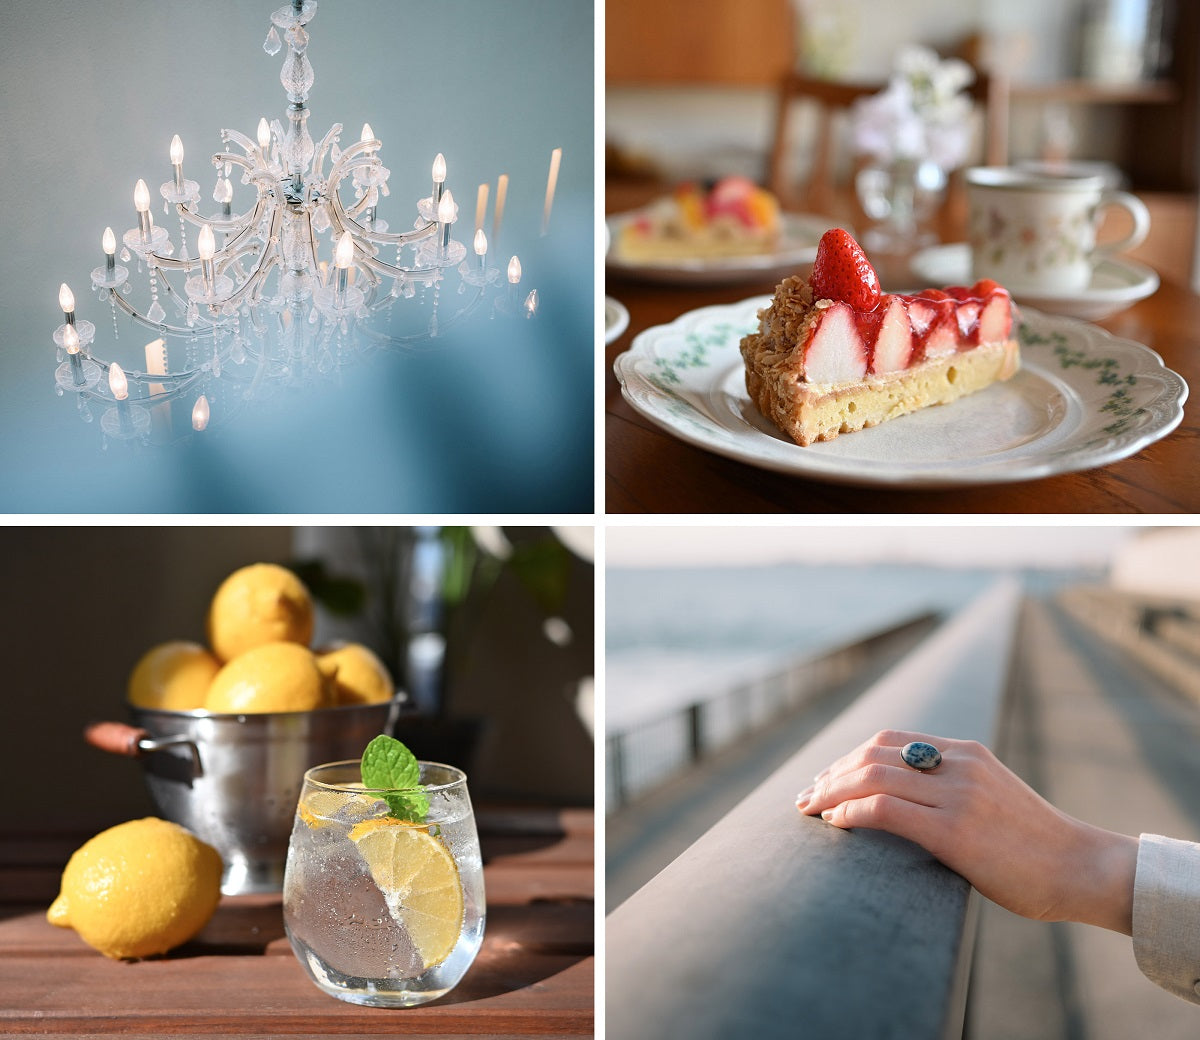 Four shots taken with the NIKKOR Z DX 24mm f/1.7 Lens. They show glass lighting, a cake, the lemons and a glass with wate, and women's hand with a ring on the middle finger